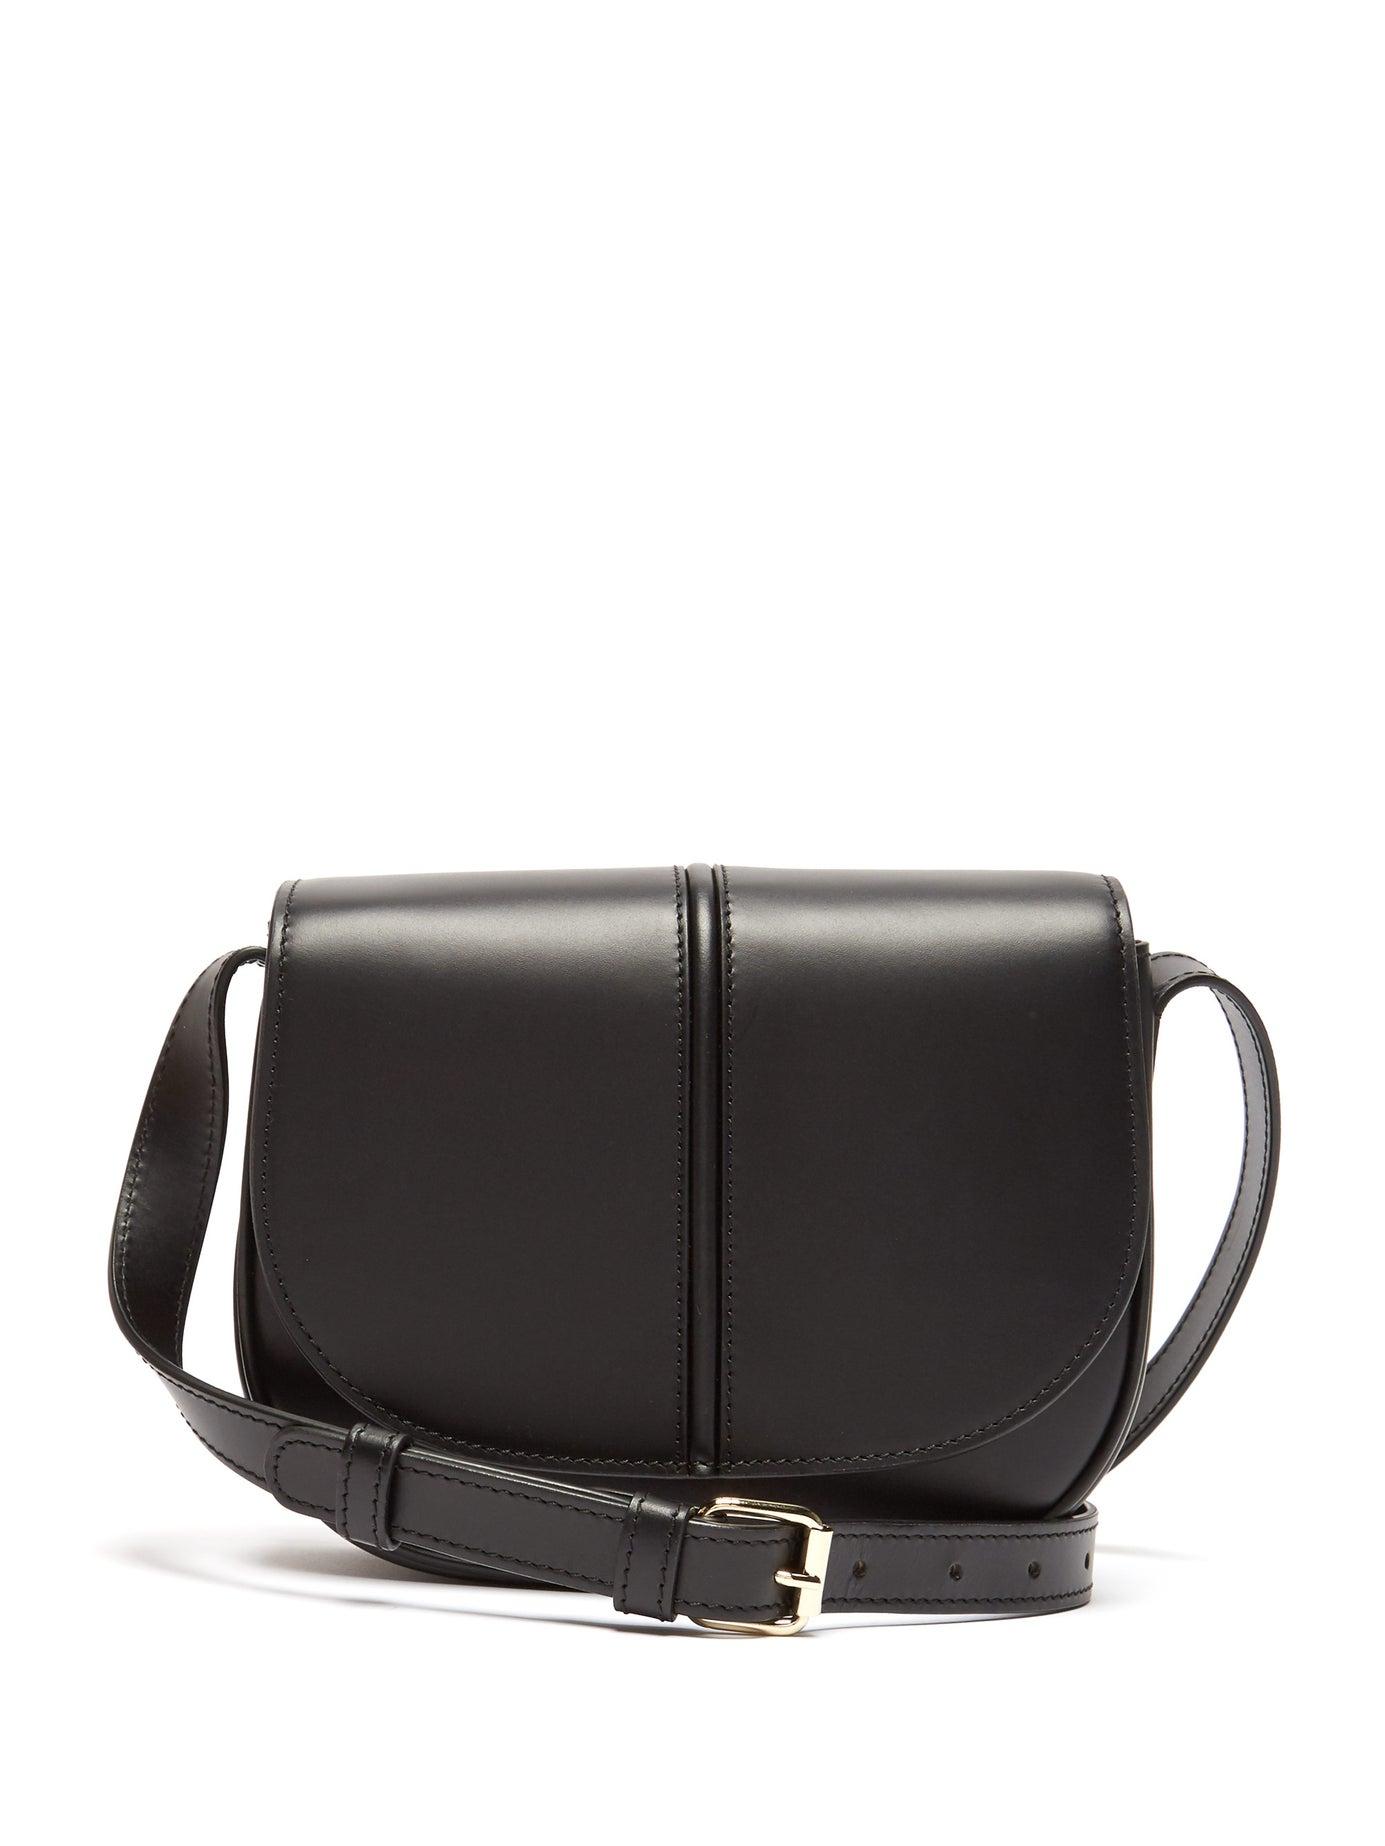 A.P.C. Betty Leather Cross Body Bag in Black - Lyst